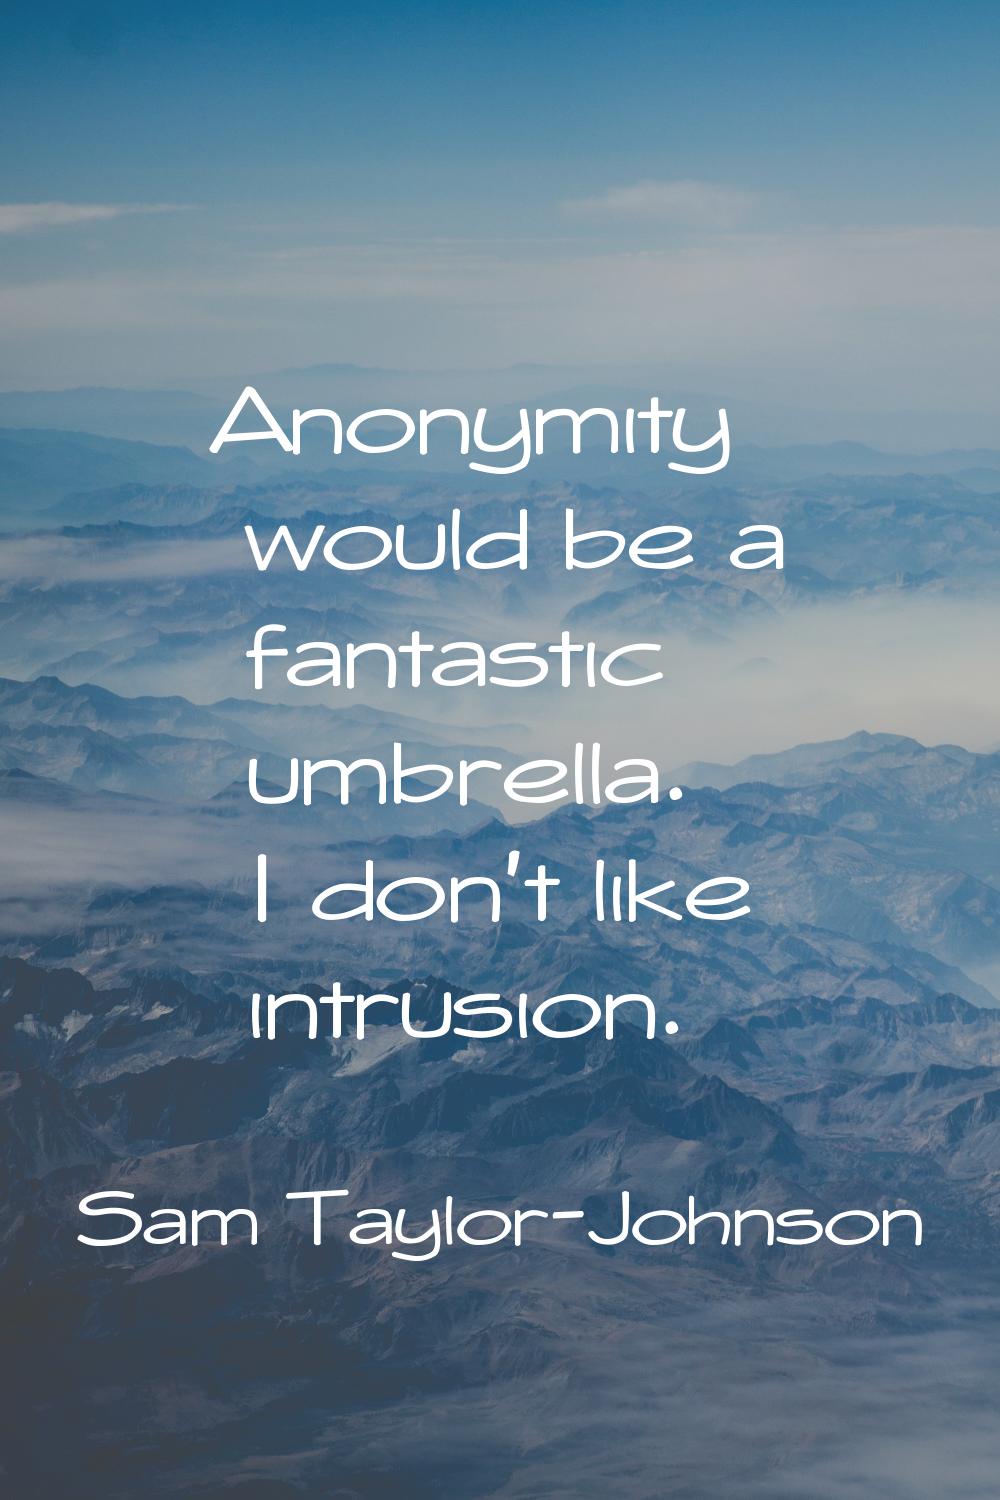 Anonymity would be a fantastic umbrella. I don't like intrusion.